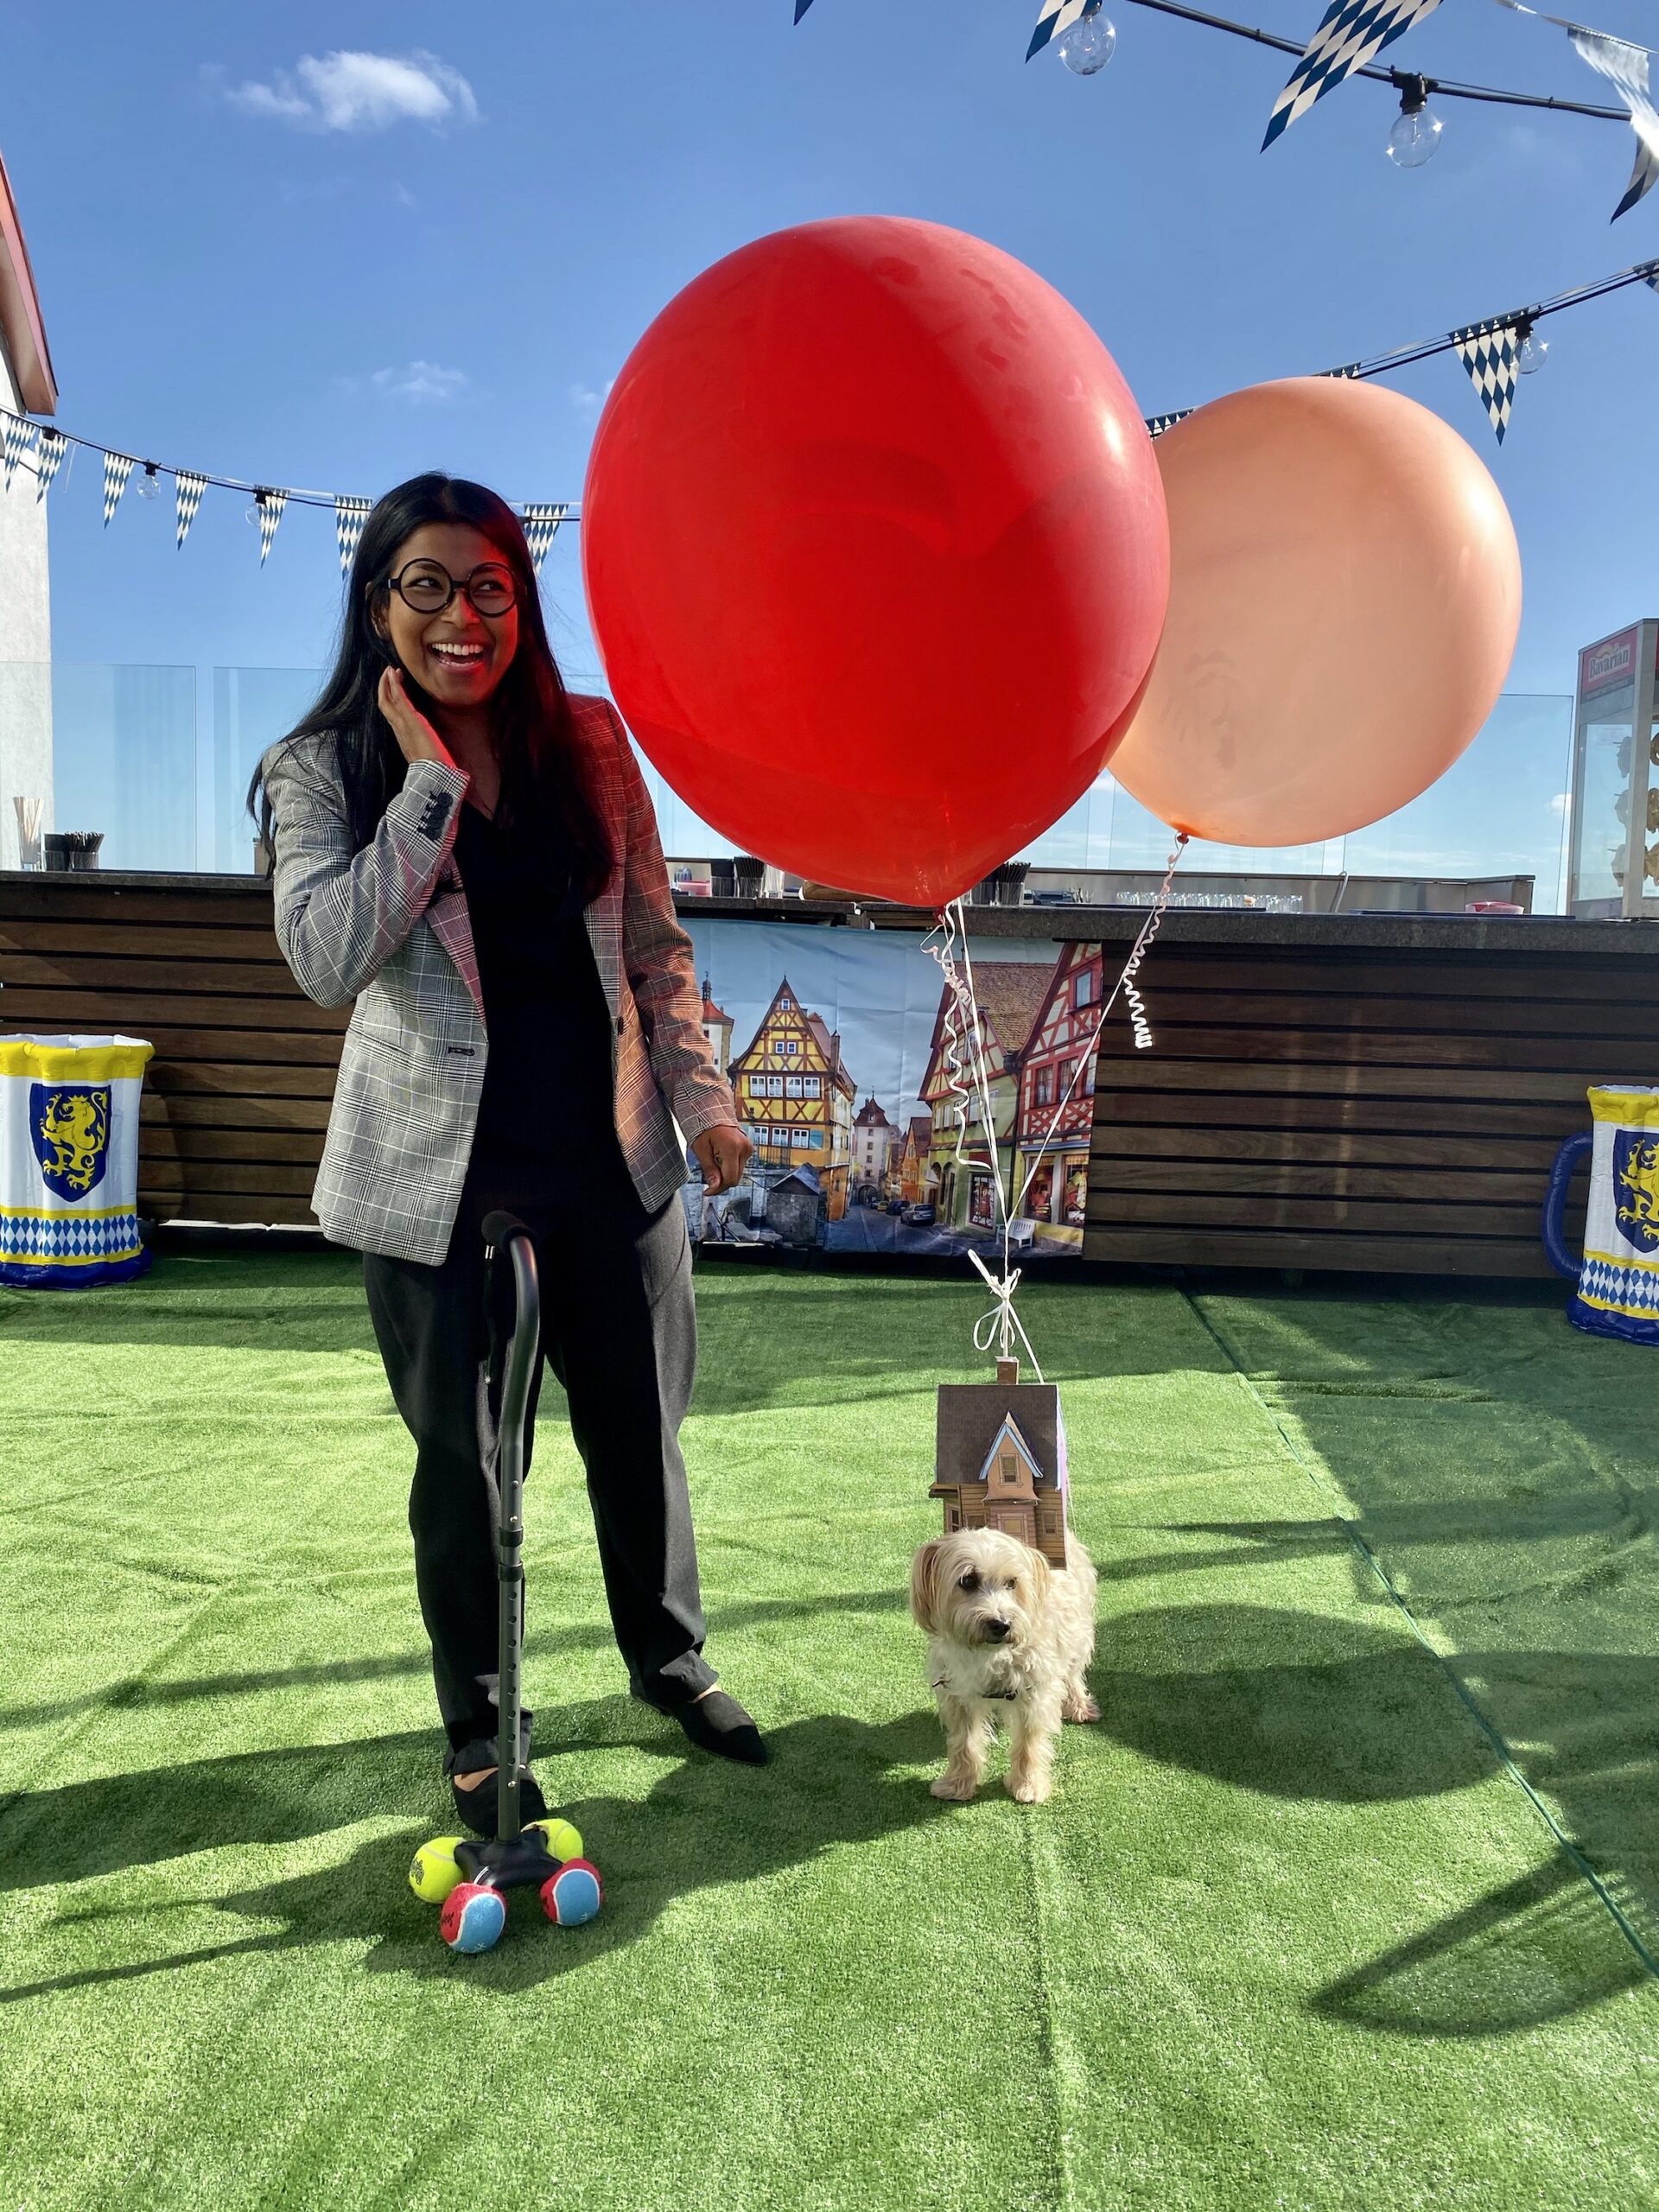 a women dressed as the old man from Up is standing next to a dog dressed as the Up House with balloons attached